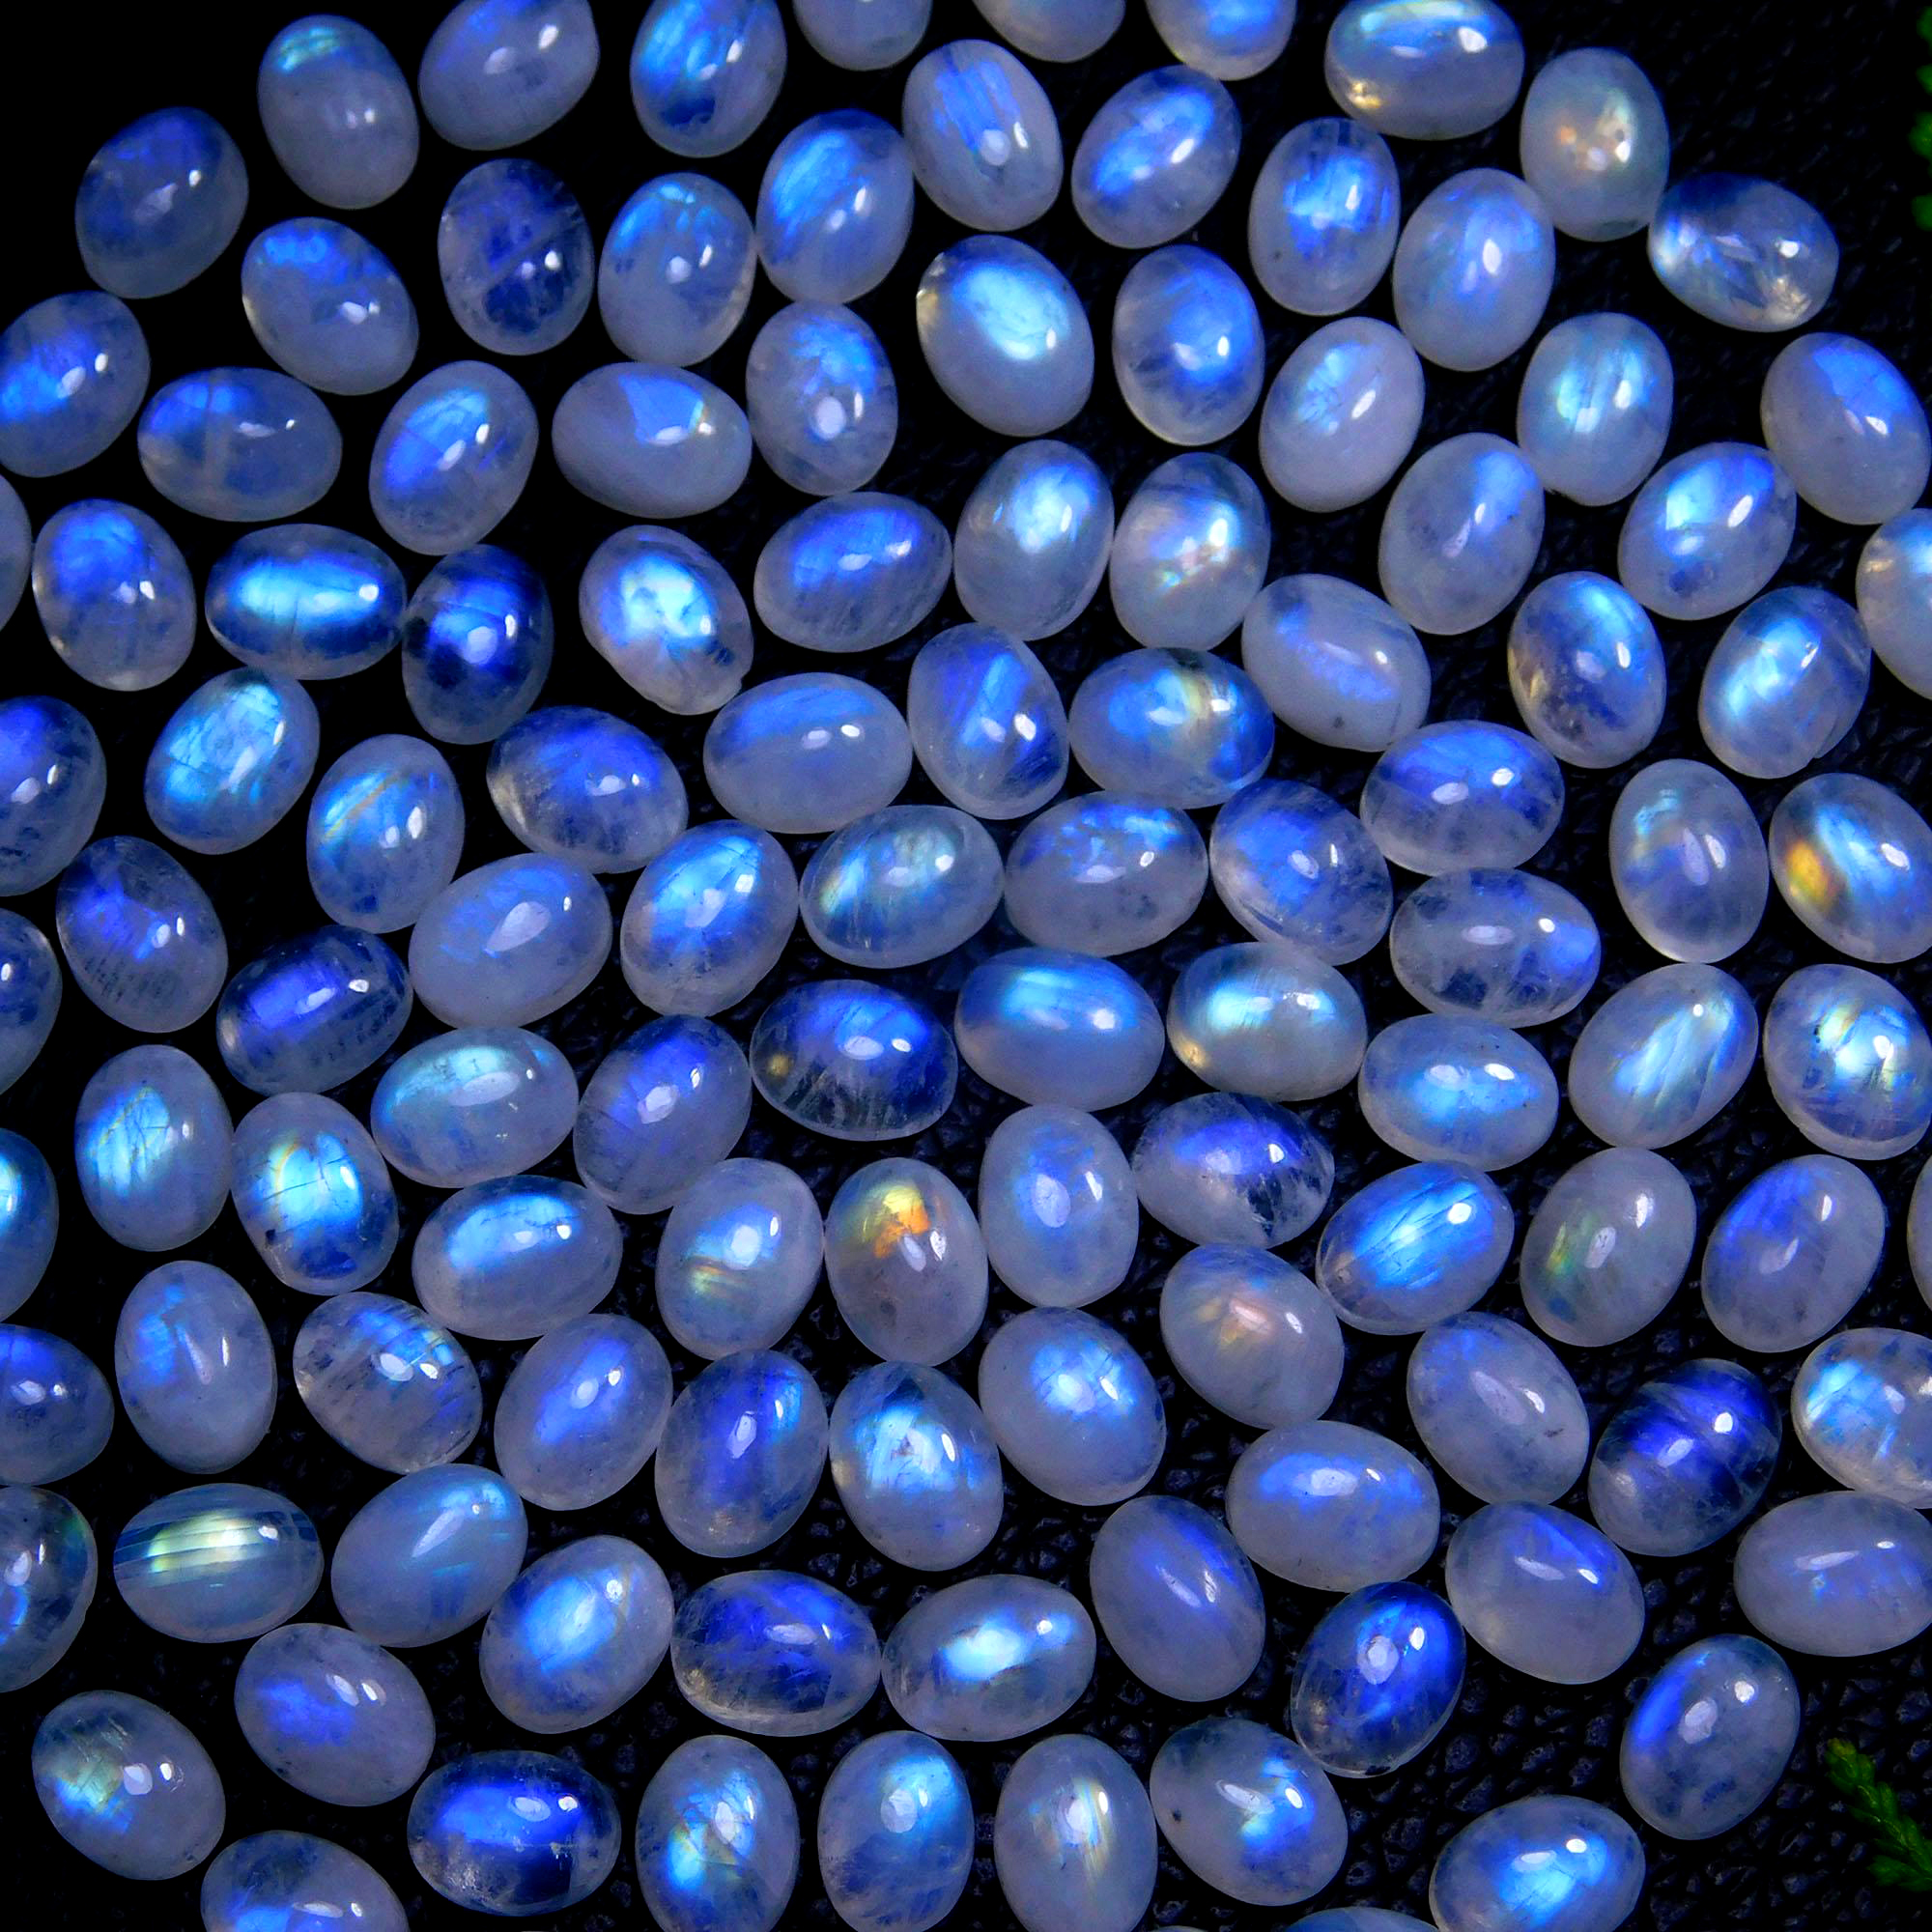 125Pcs 199Cts Natural Rainbow Moonstone Oval Shape Blue Fire Cabochon Lot Loose Gemstone Jewelry Crystal For Birthday Gift 8X6mm #9854